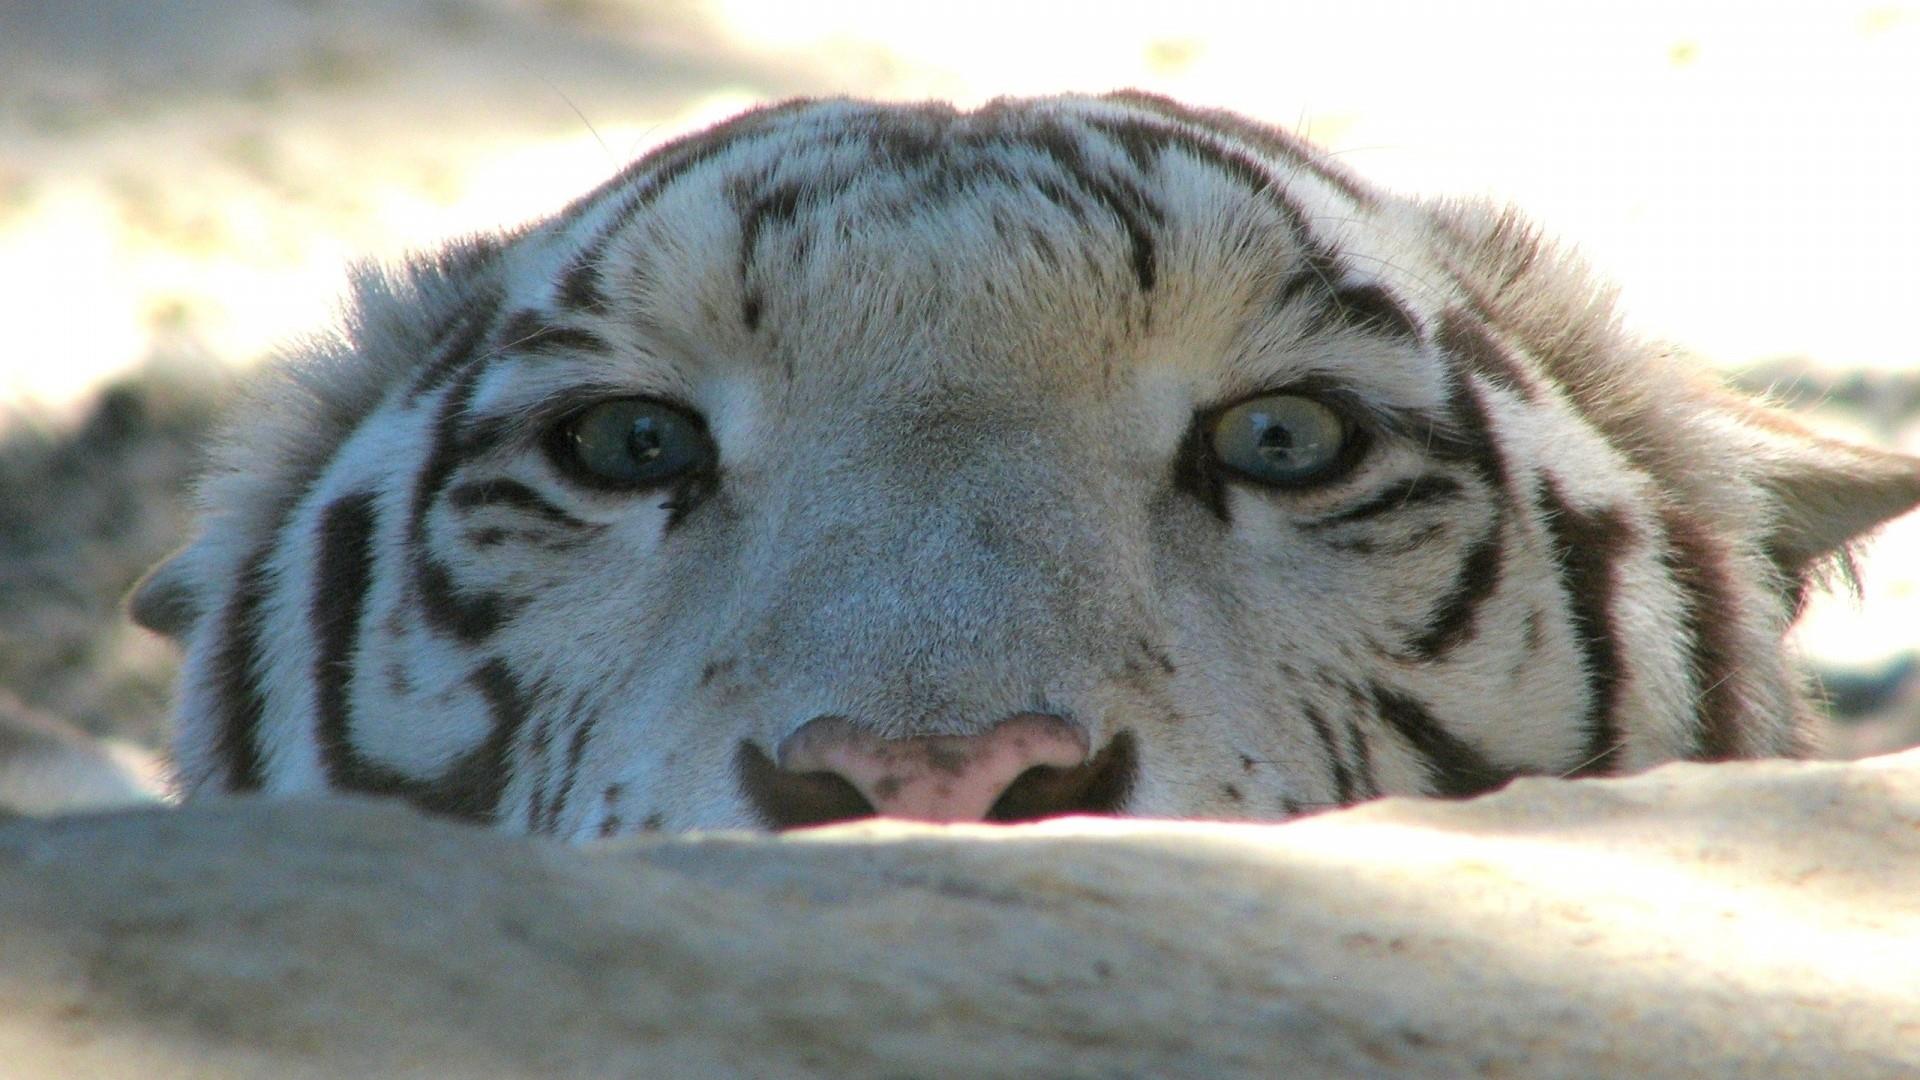 White tiger wallpaper - backiee